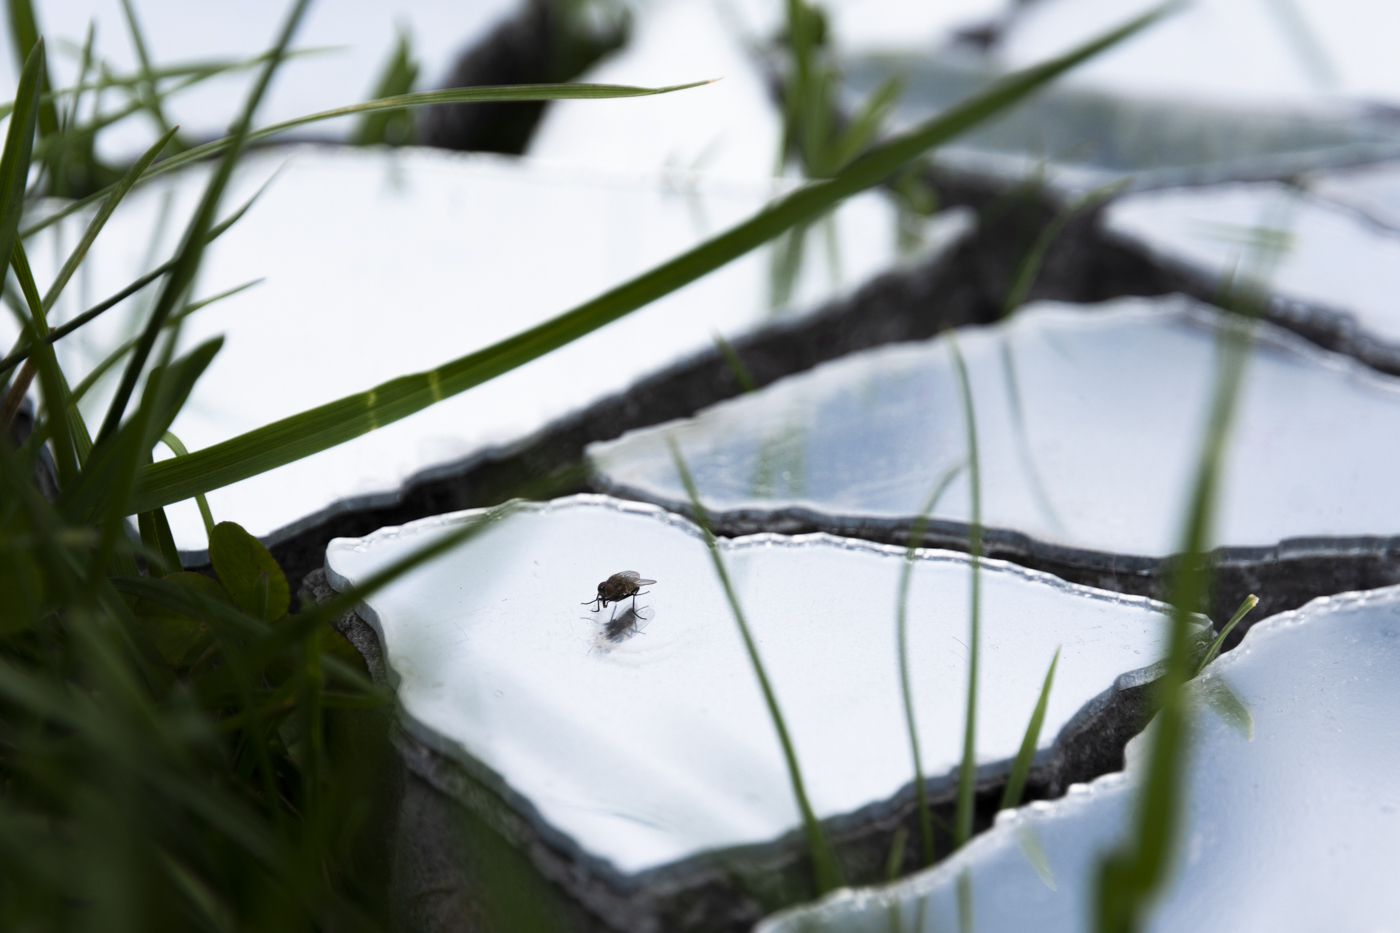 a close-up image of a fly standing on top of a mirror that is sitting in grass.